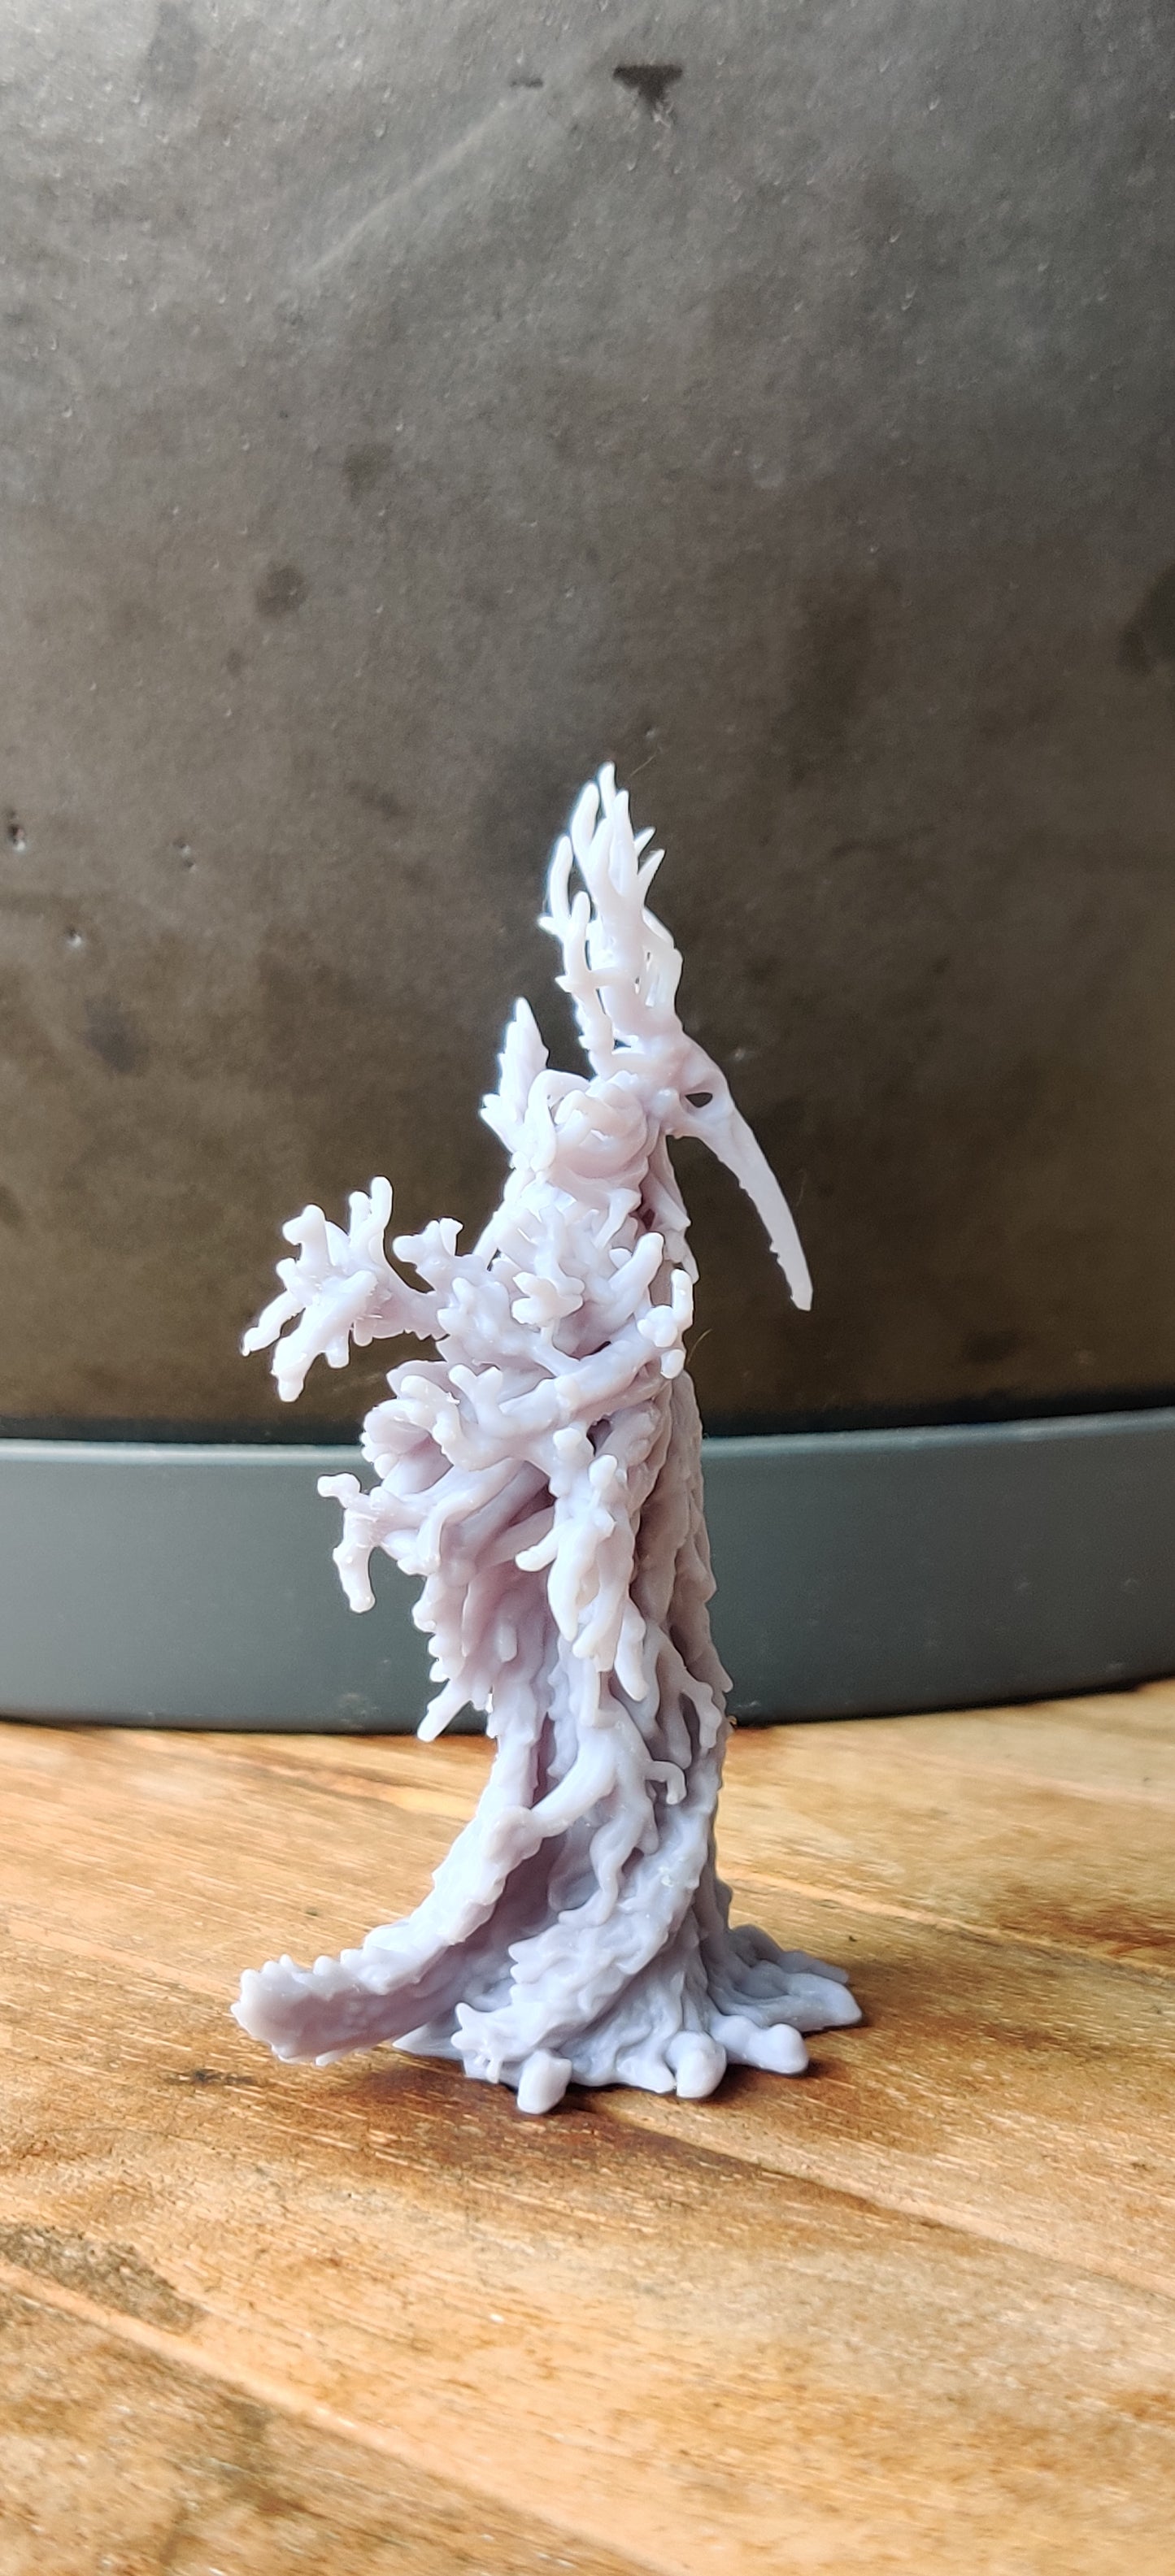 3D printed Lord of the roots mini